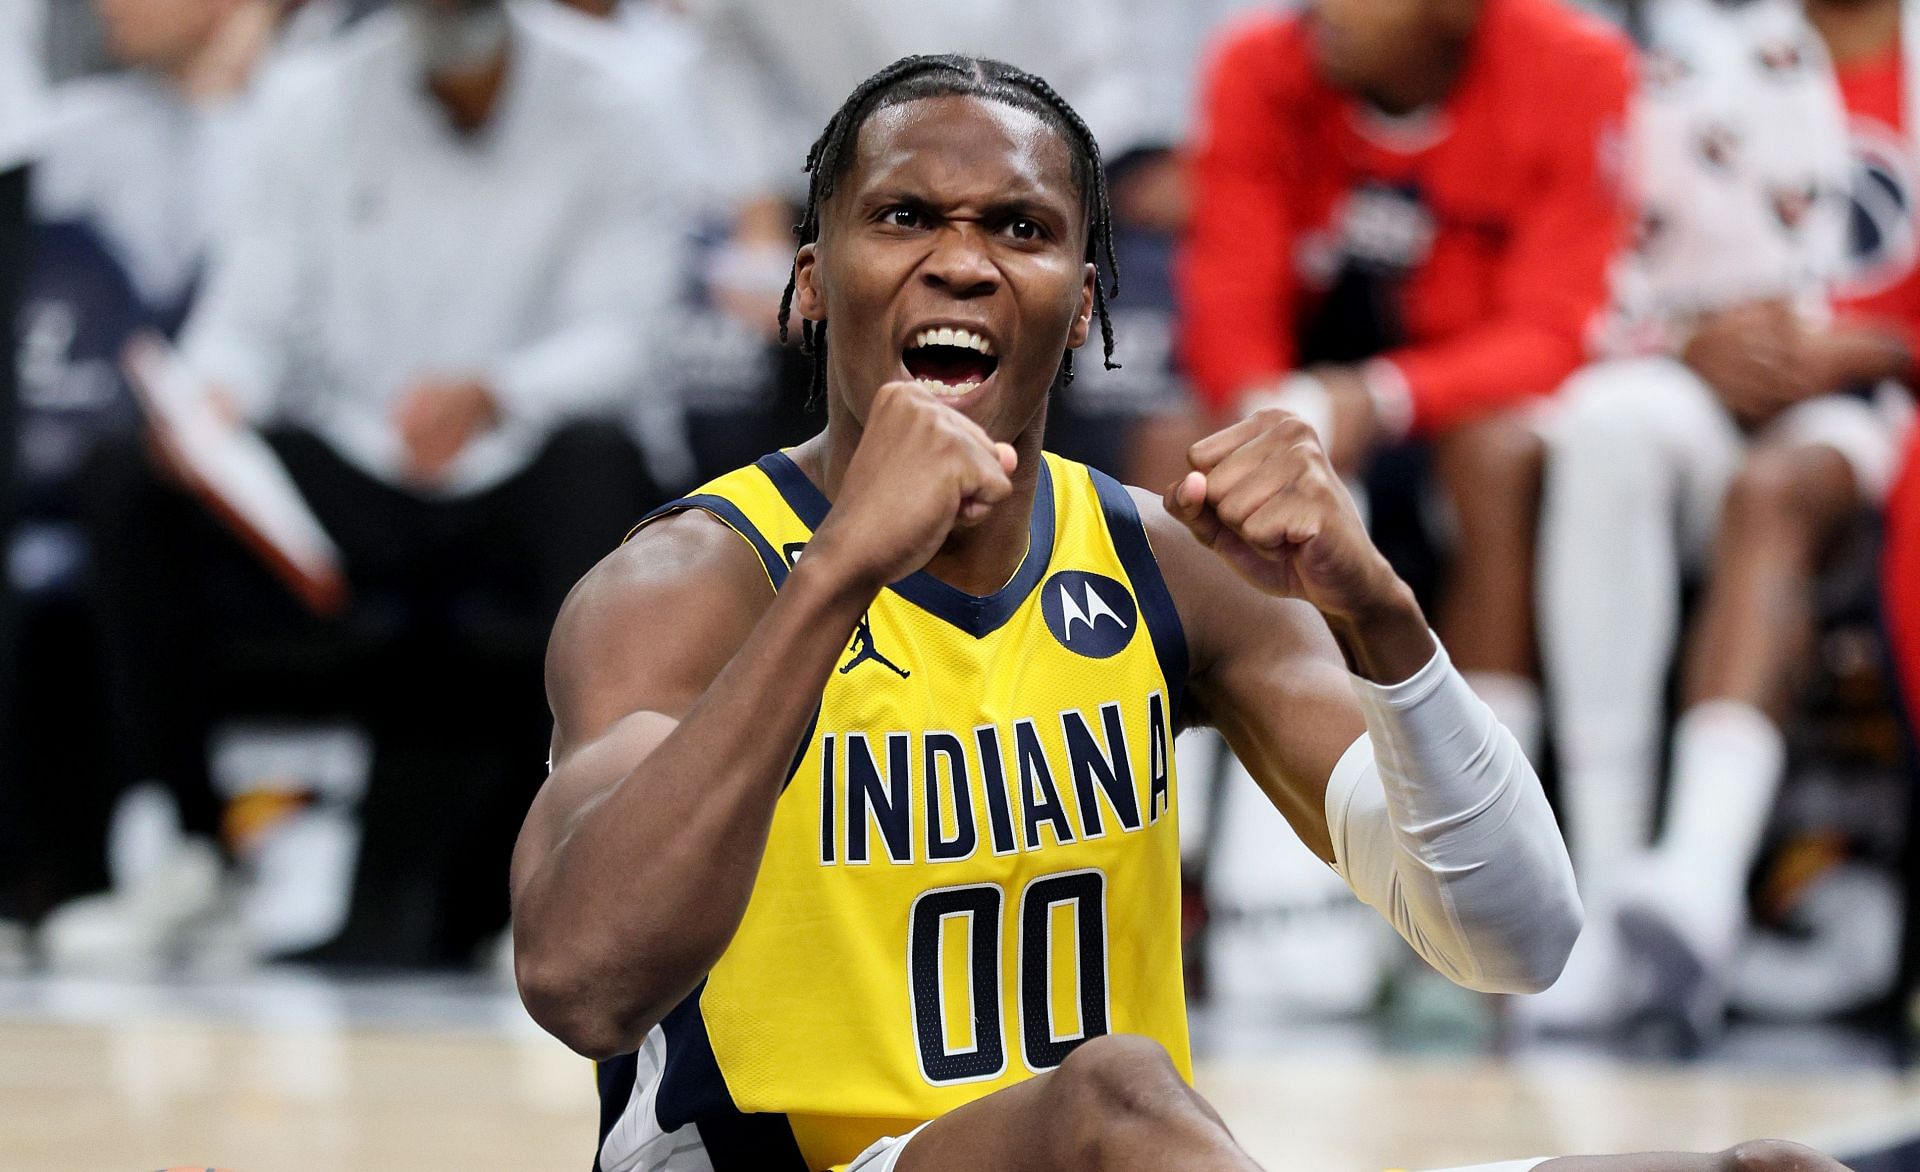 Indiana Pacers guard Bennedict Mathurin inducted into Arizona